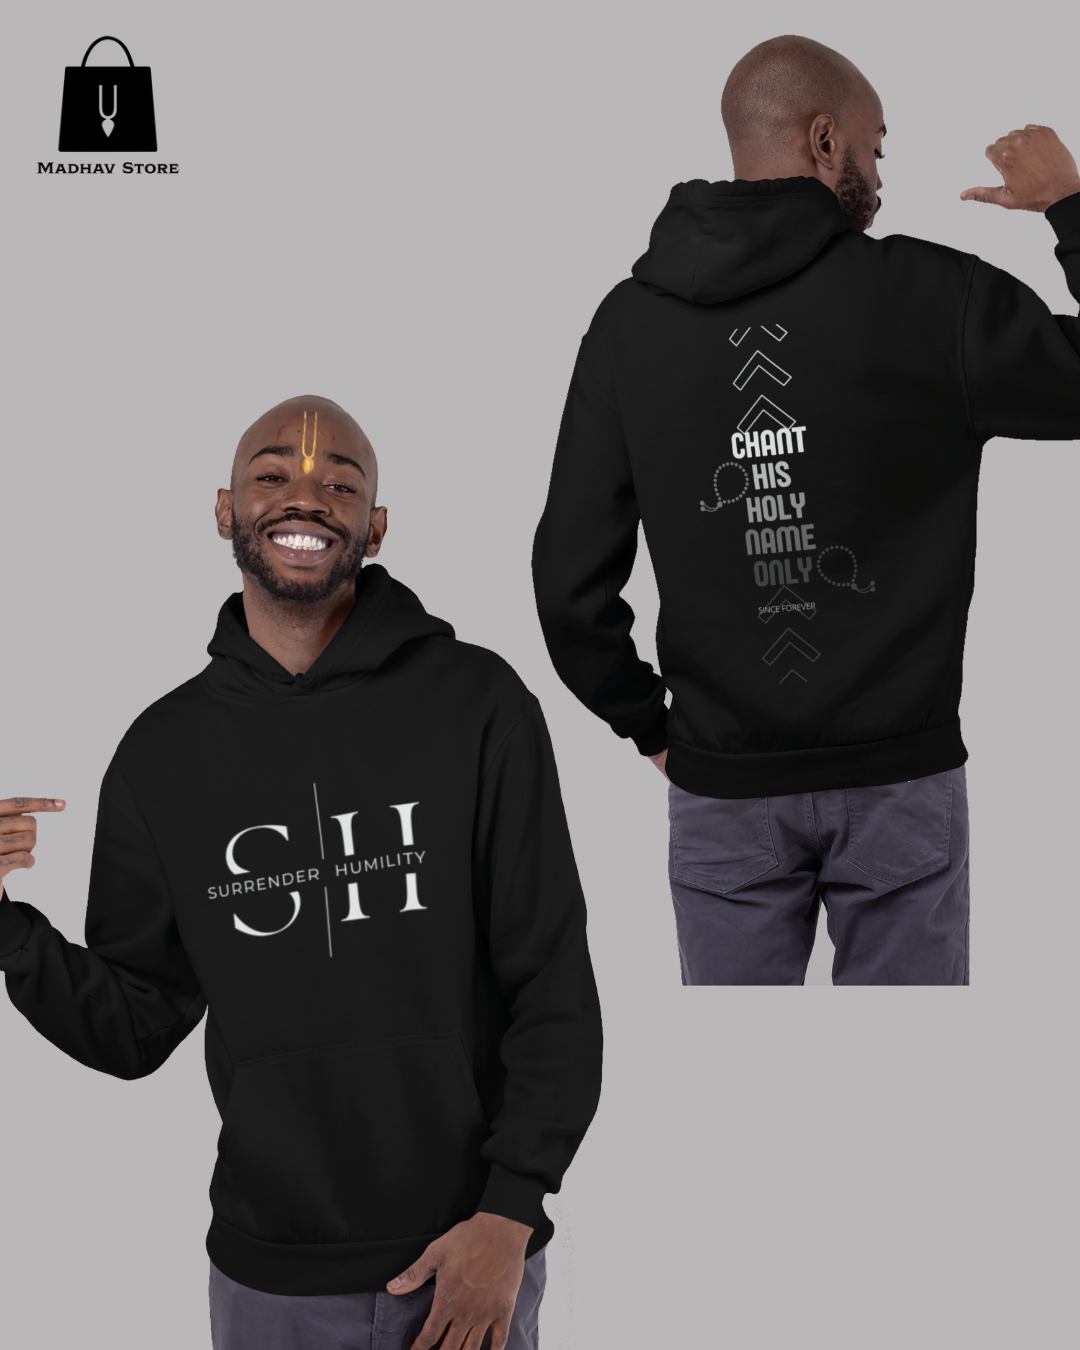 Surrender Humility & Chant his holy name only| Premium Cotton Hoodie for Men